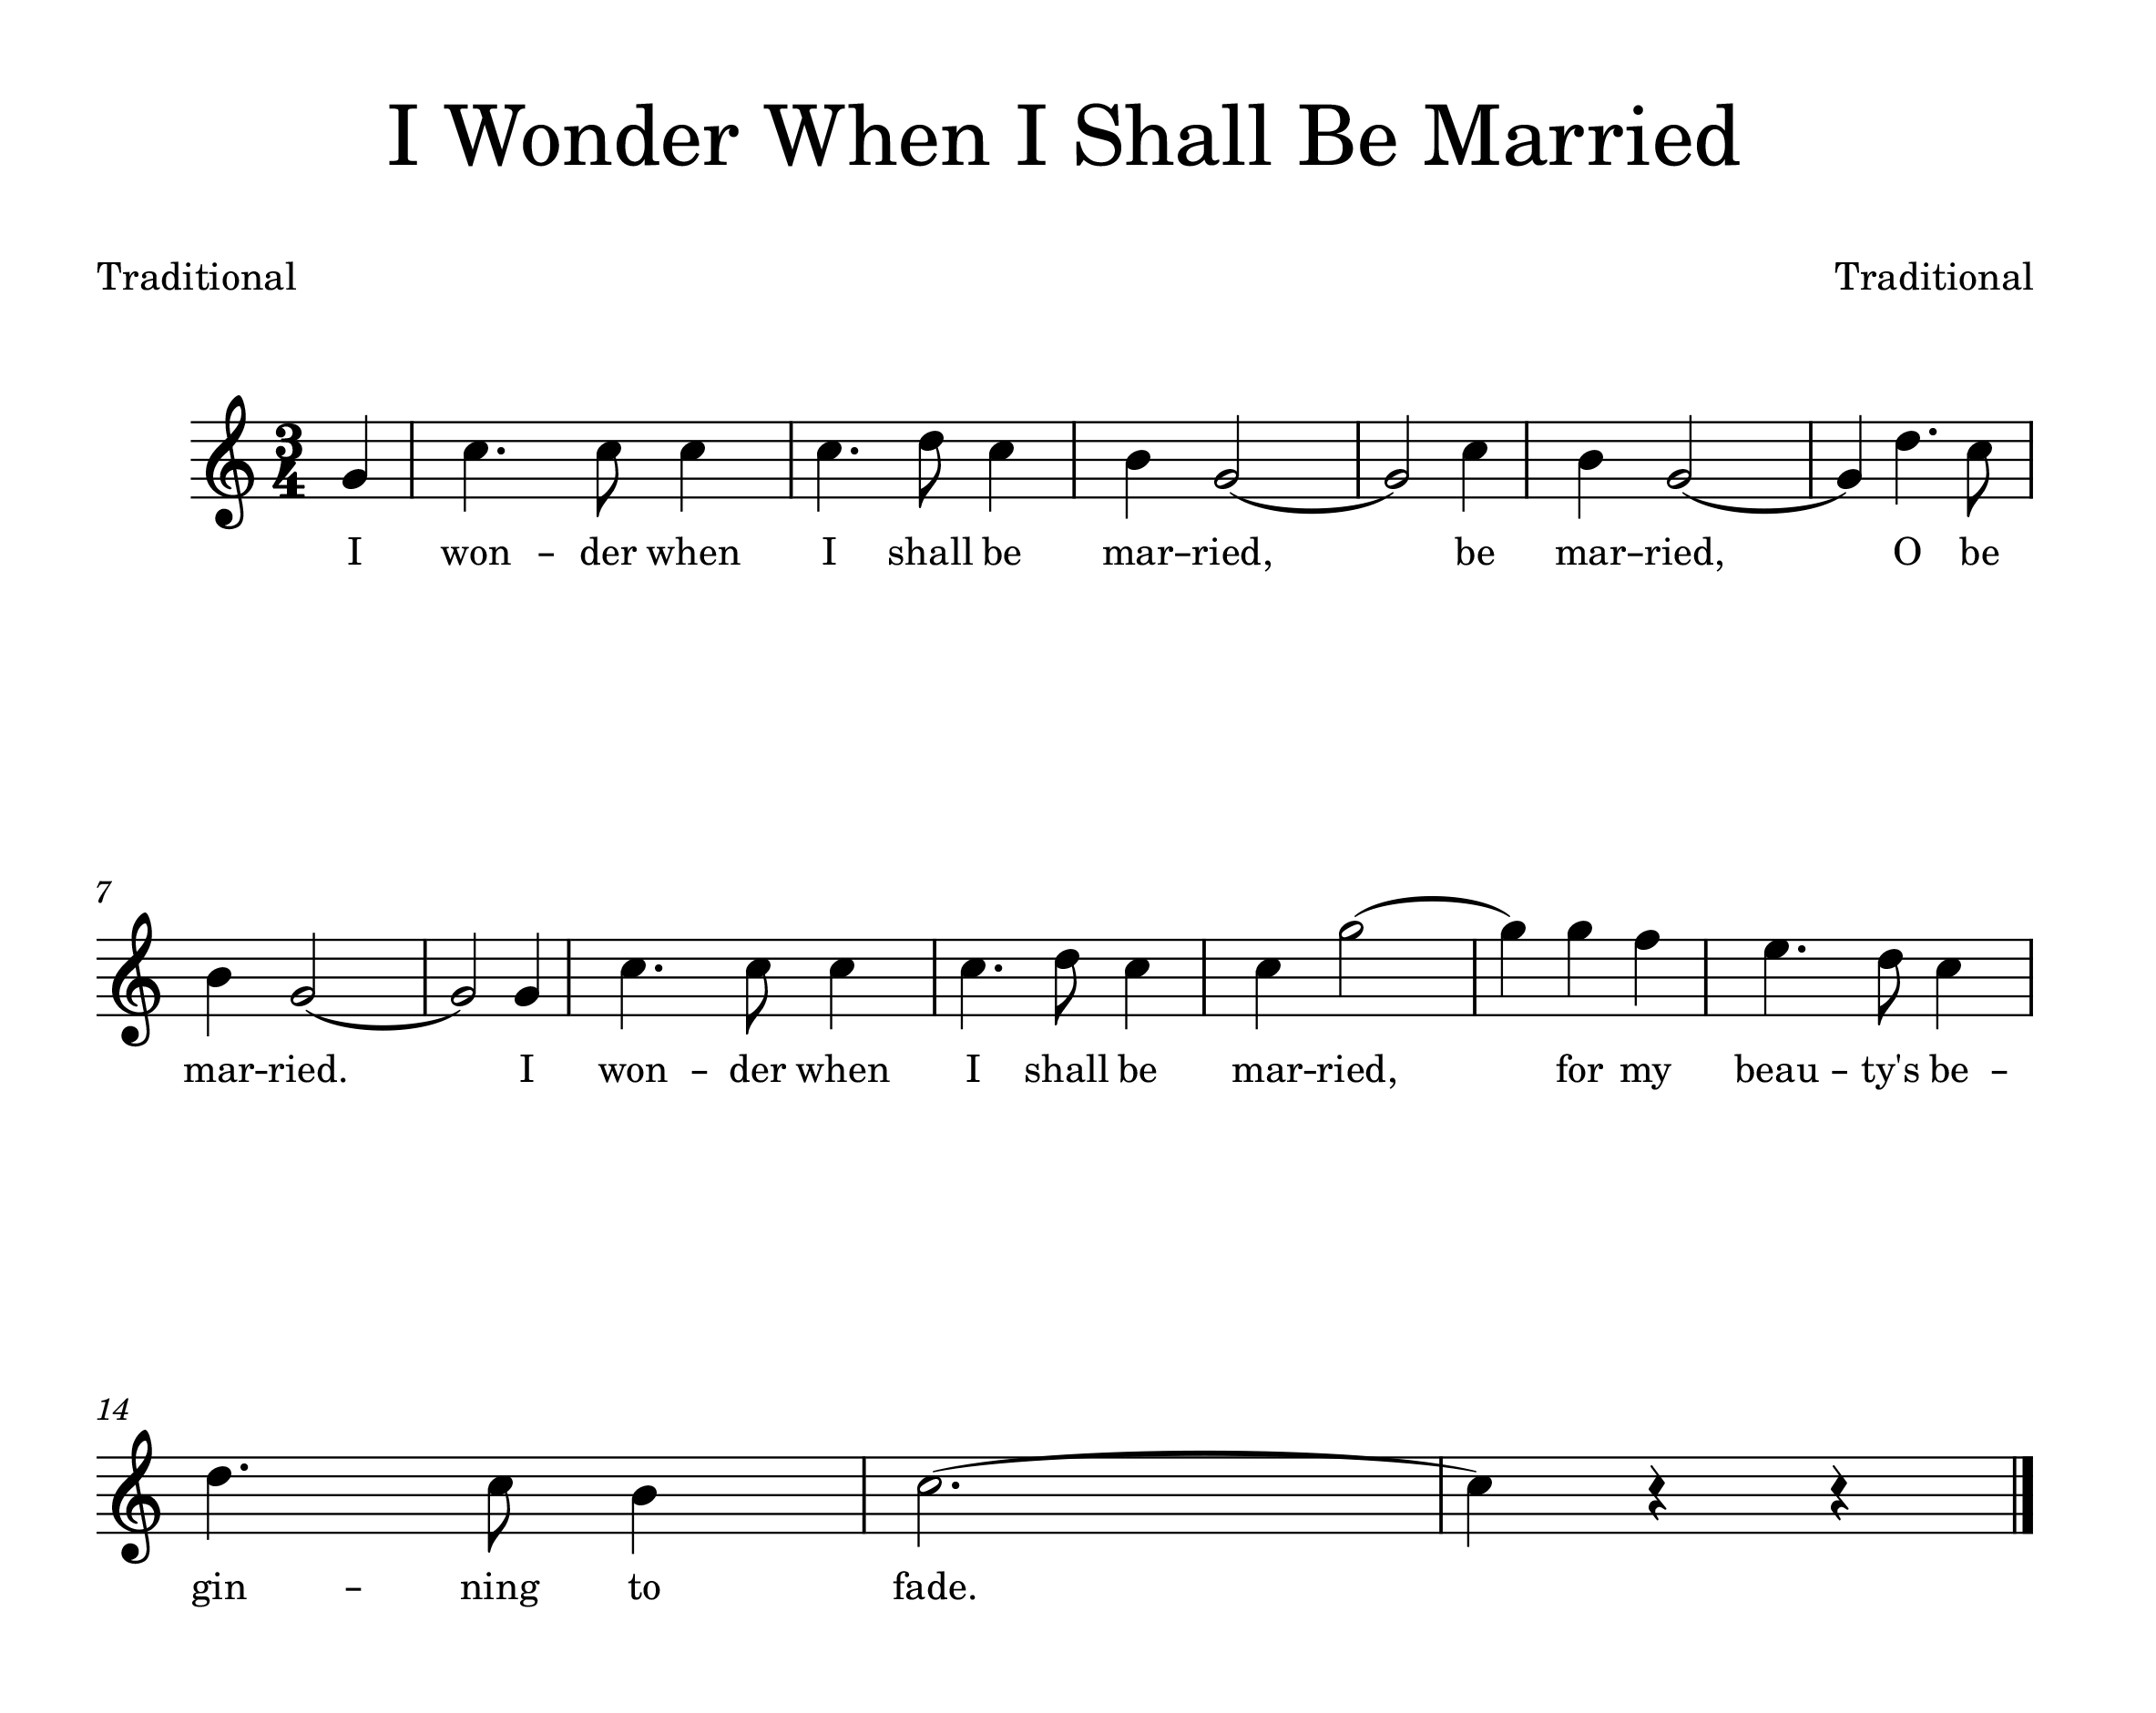 Sheet music for "I Wonder When I Shall Be Married"